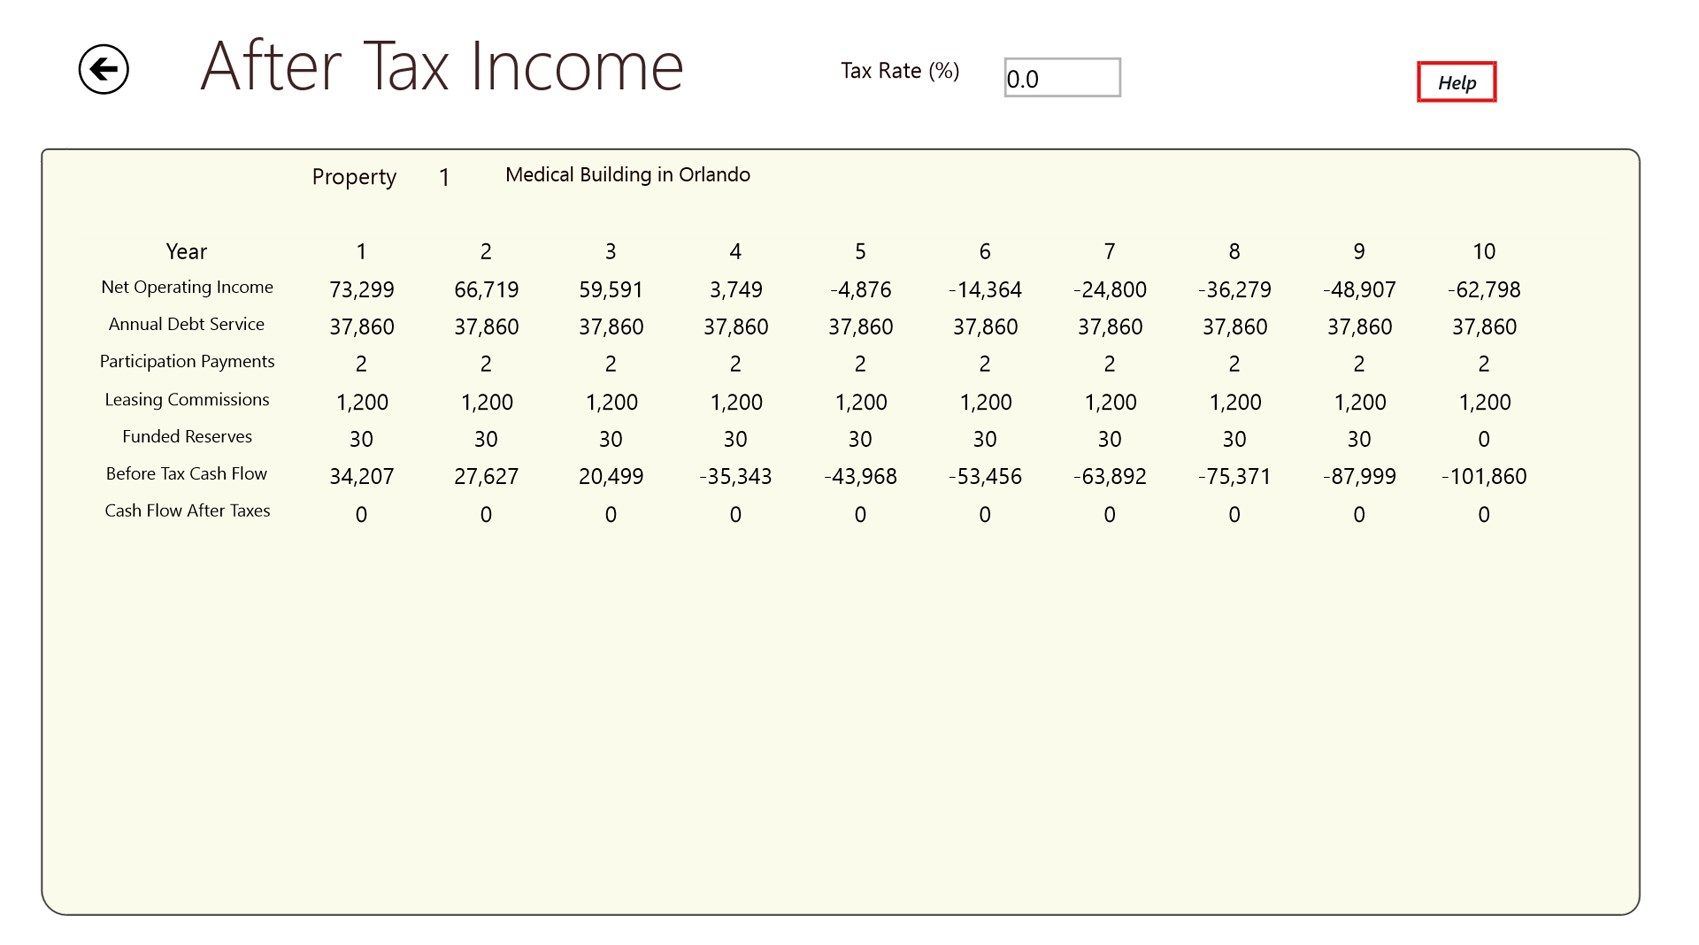 After Tax Income Summary